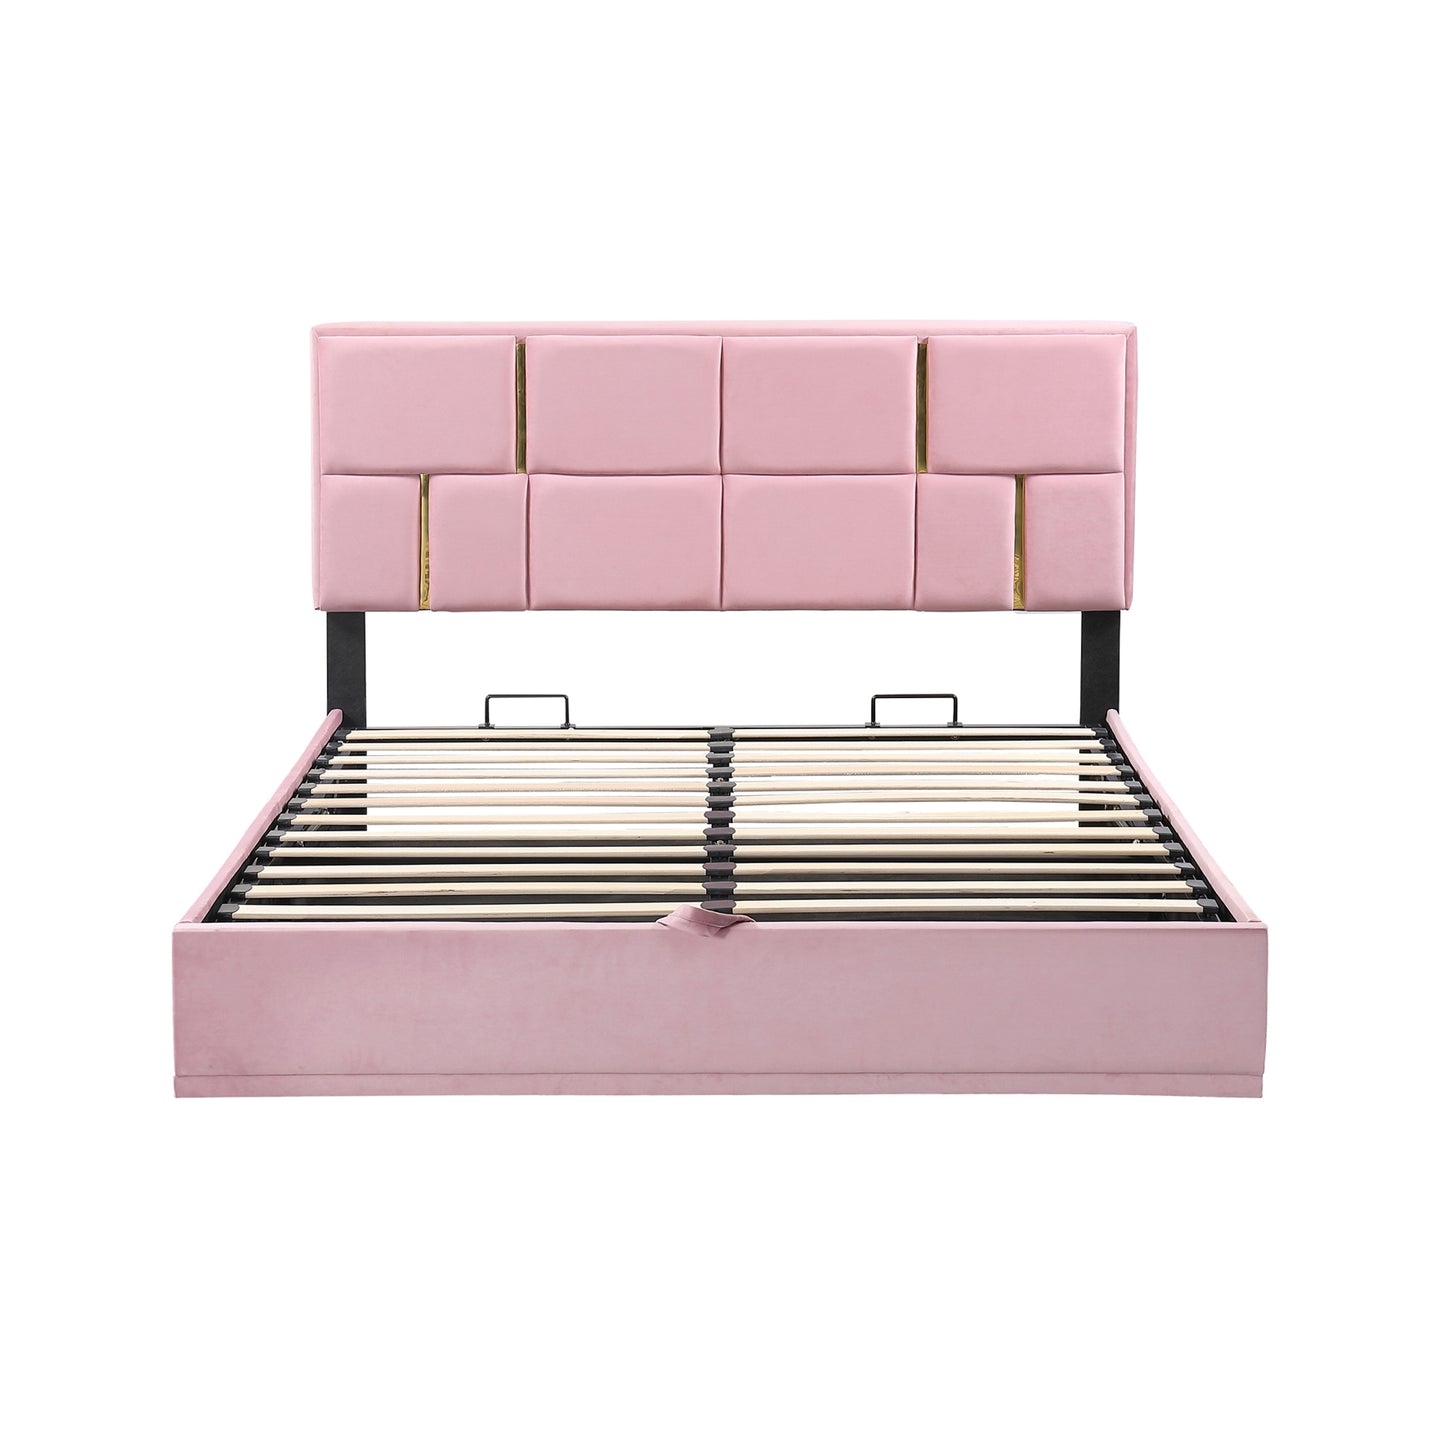 2-Pieces Bedroom Sets,Queen Size Upholstered Platform Bed with Hydraulic Storage System,Storage Ottoman with Metal Legs,Pink